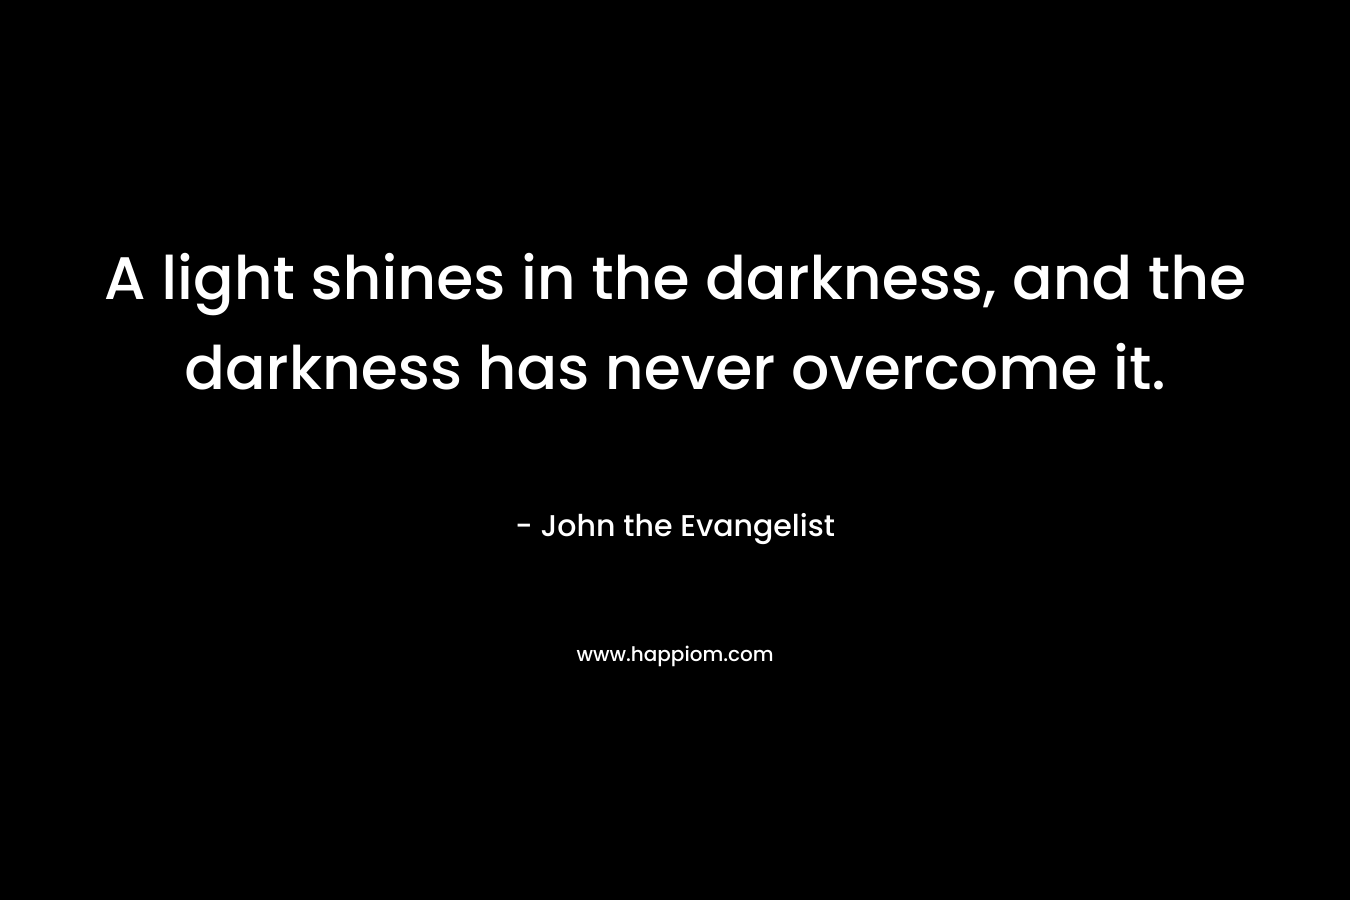 A light shines in the darkness, and the darkness has never overcome it.